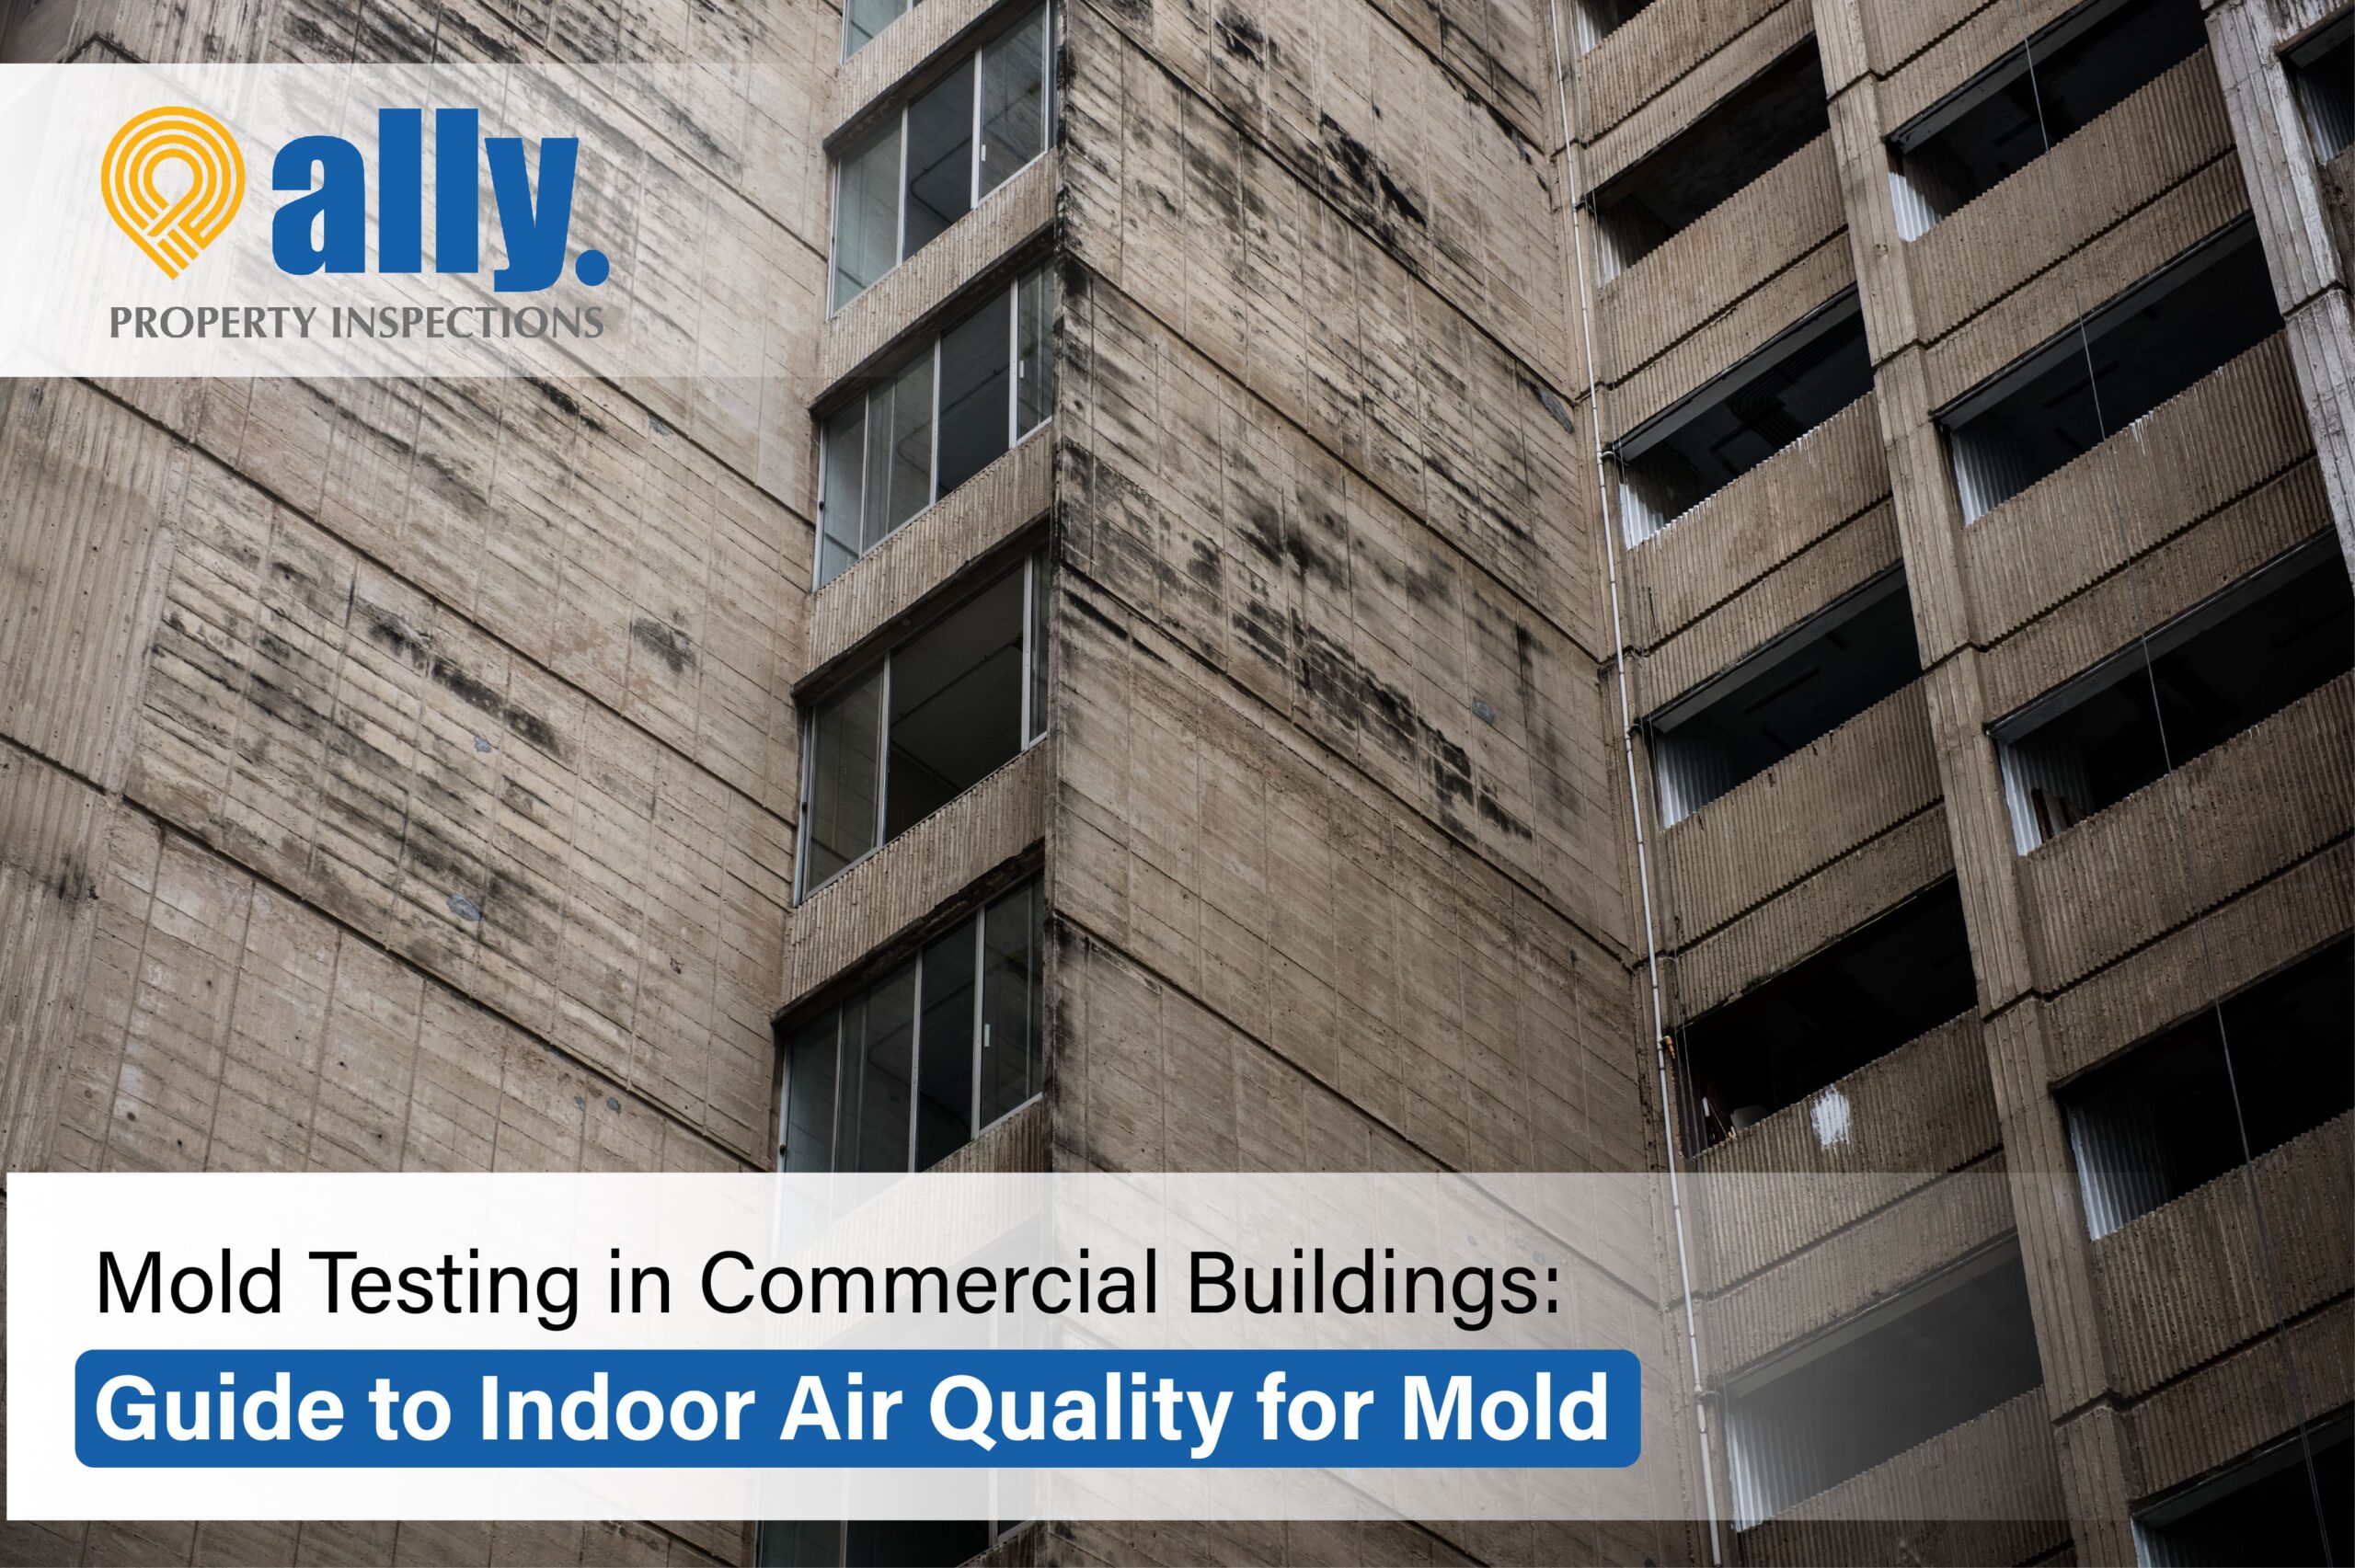 Mold Testing in Commercial Buildings: Guide to Indoor Air Quality for Mold